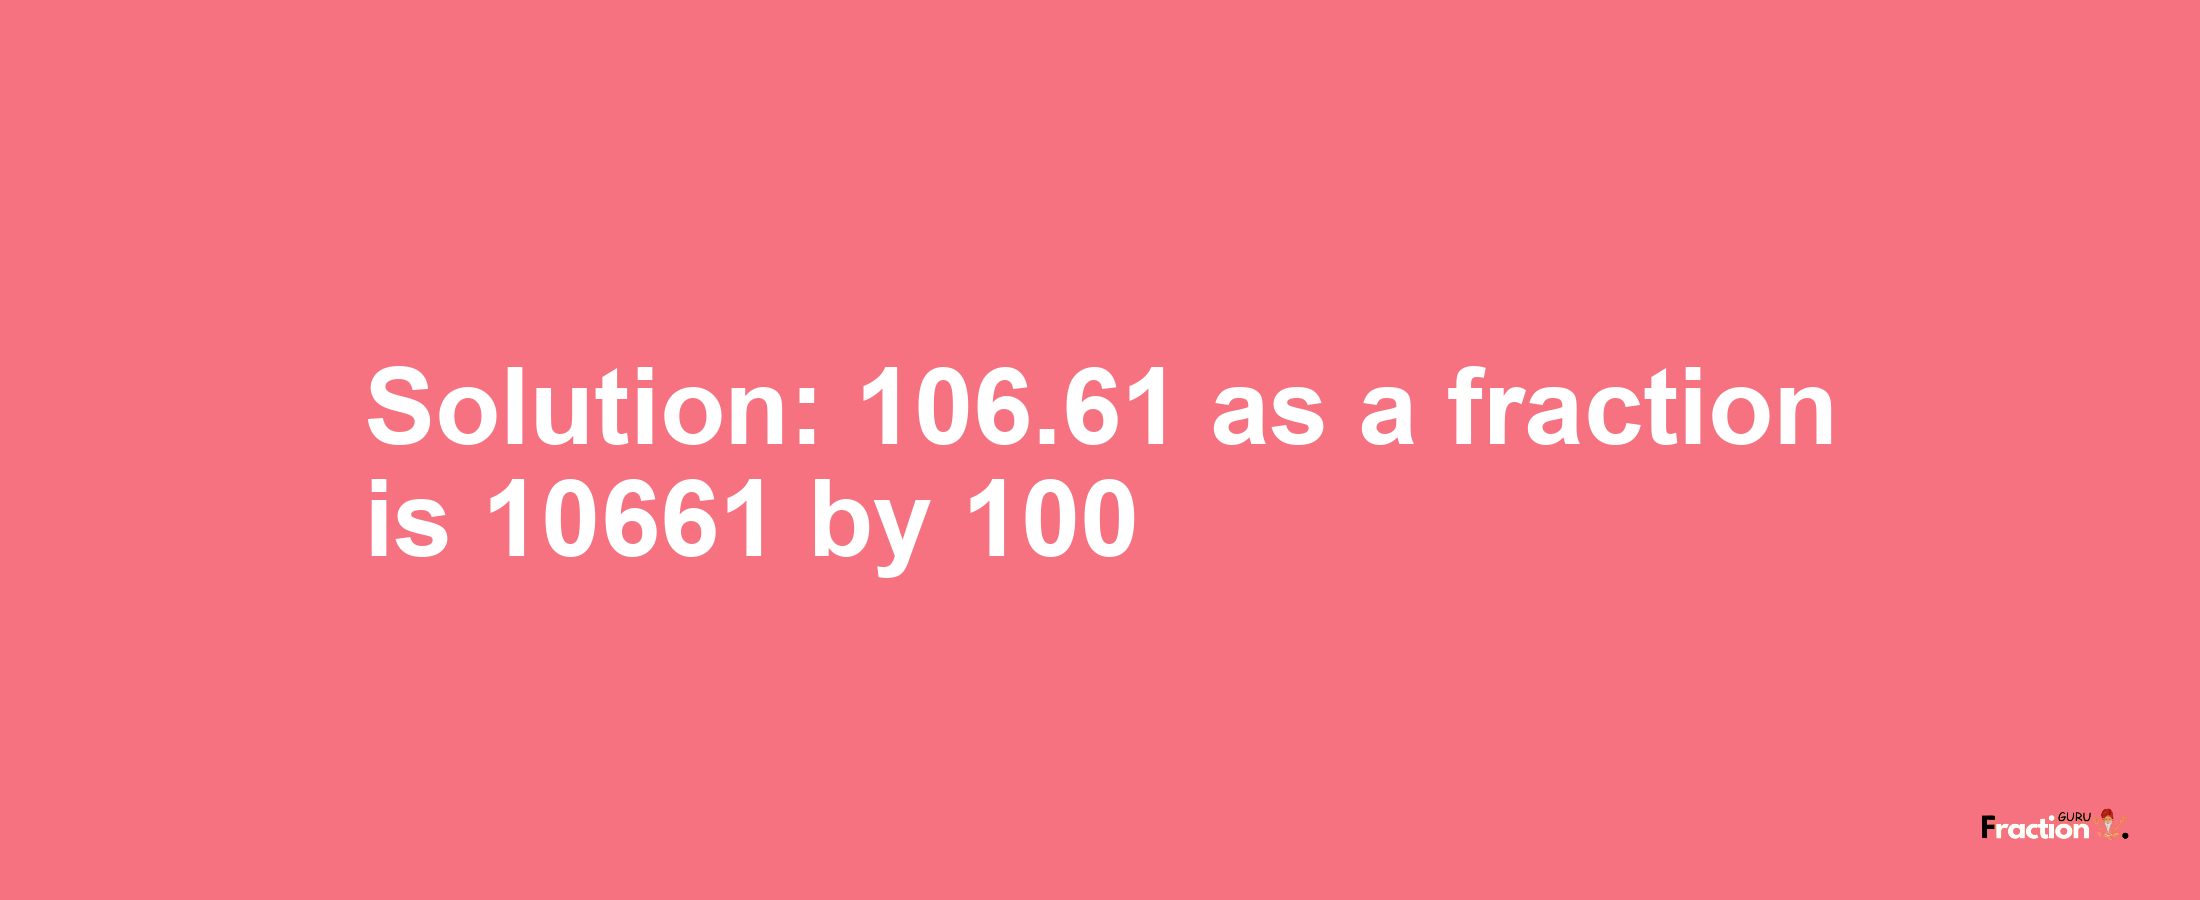 Solution:106.61 as a fraction is 10661/100